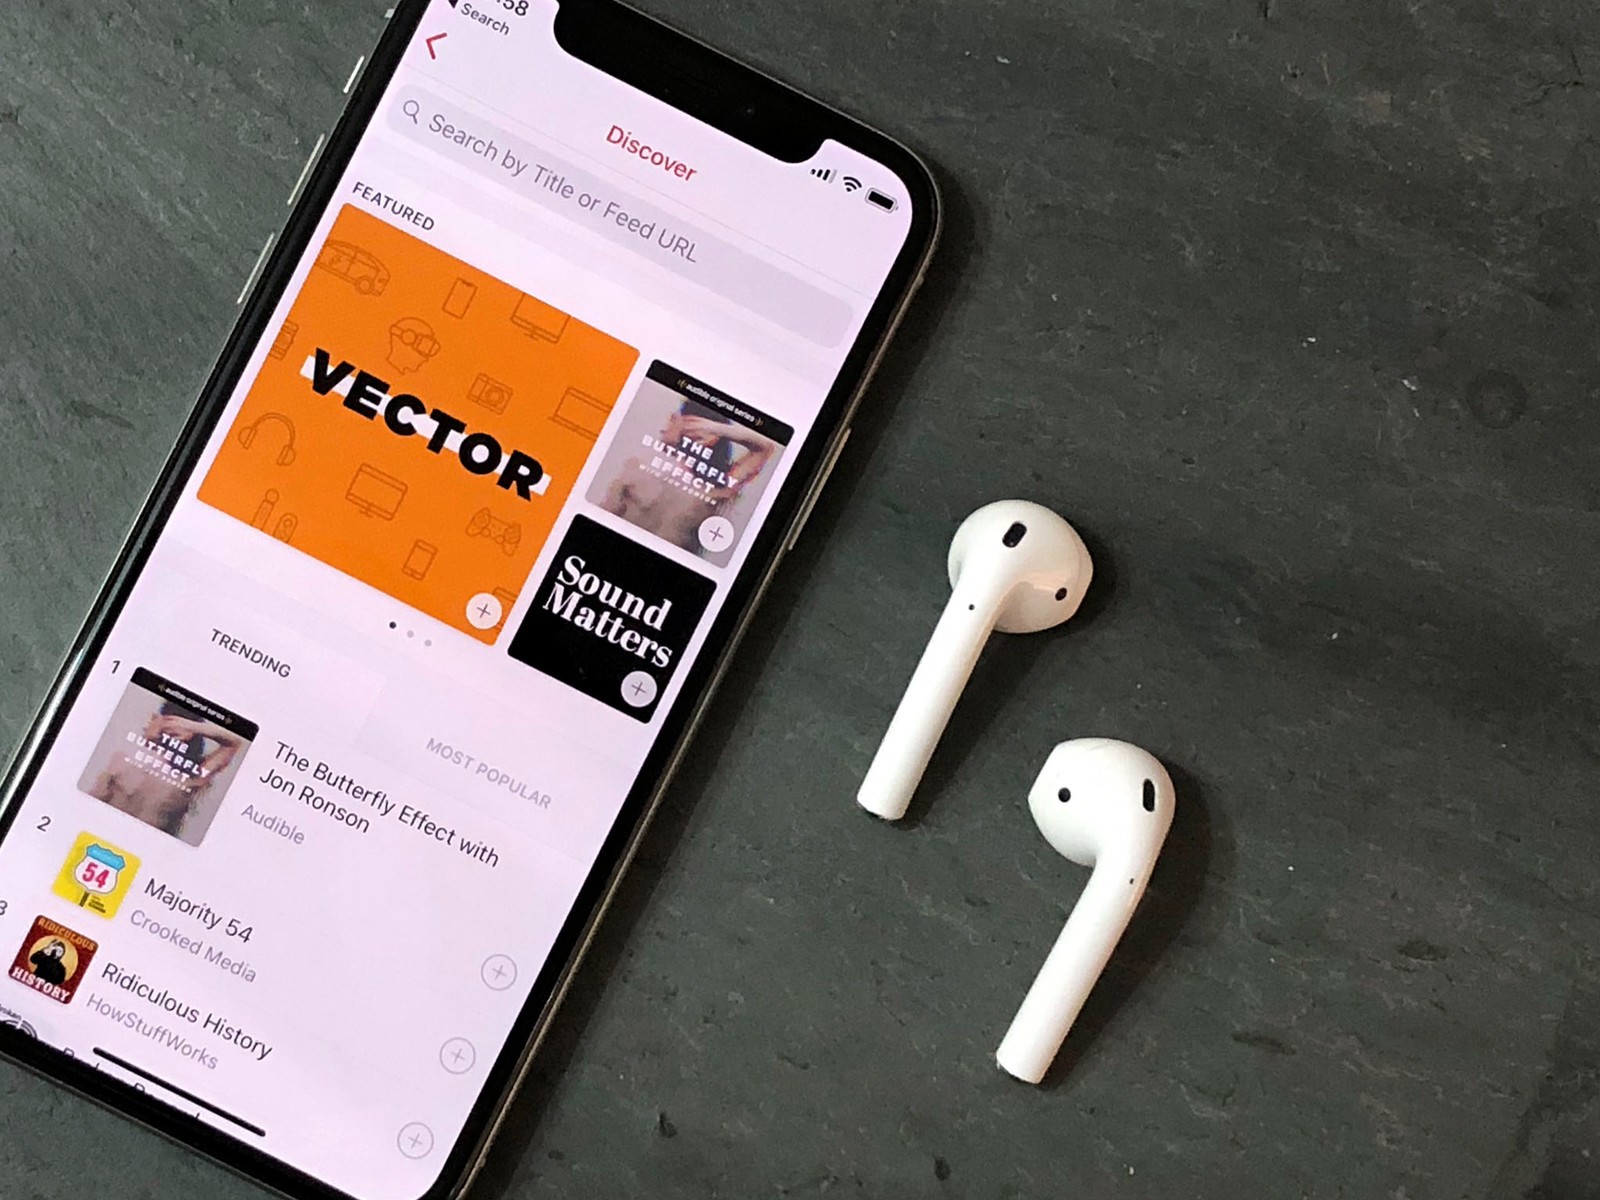 AirPods with an iPhone X